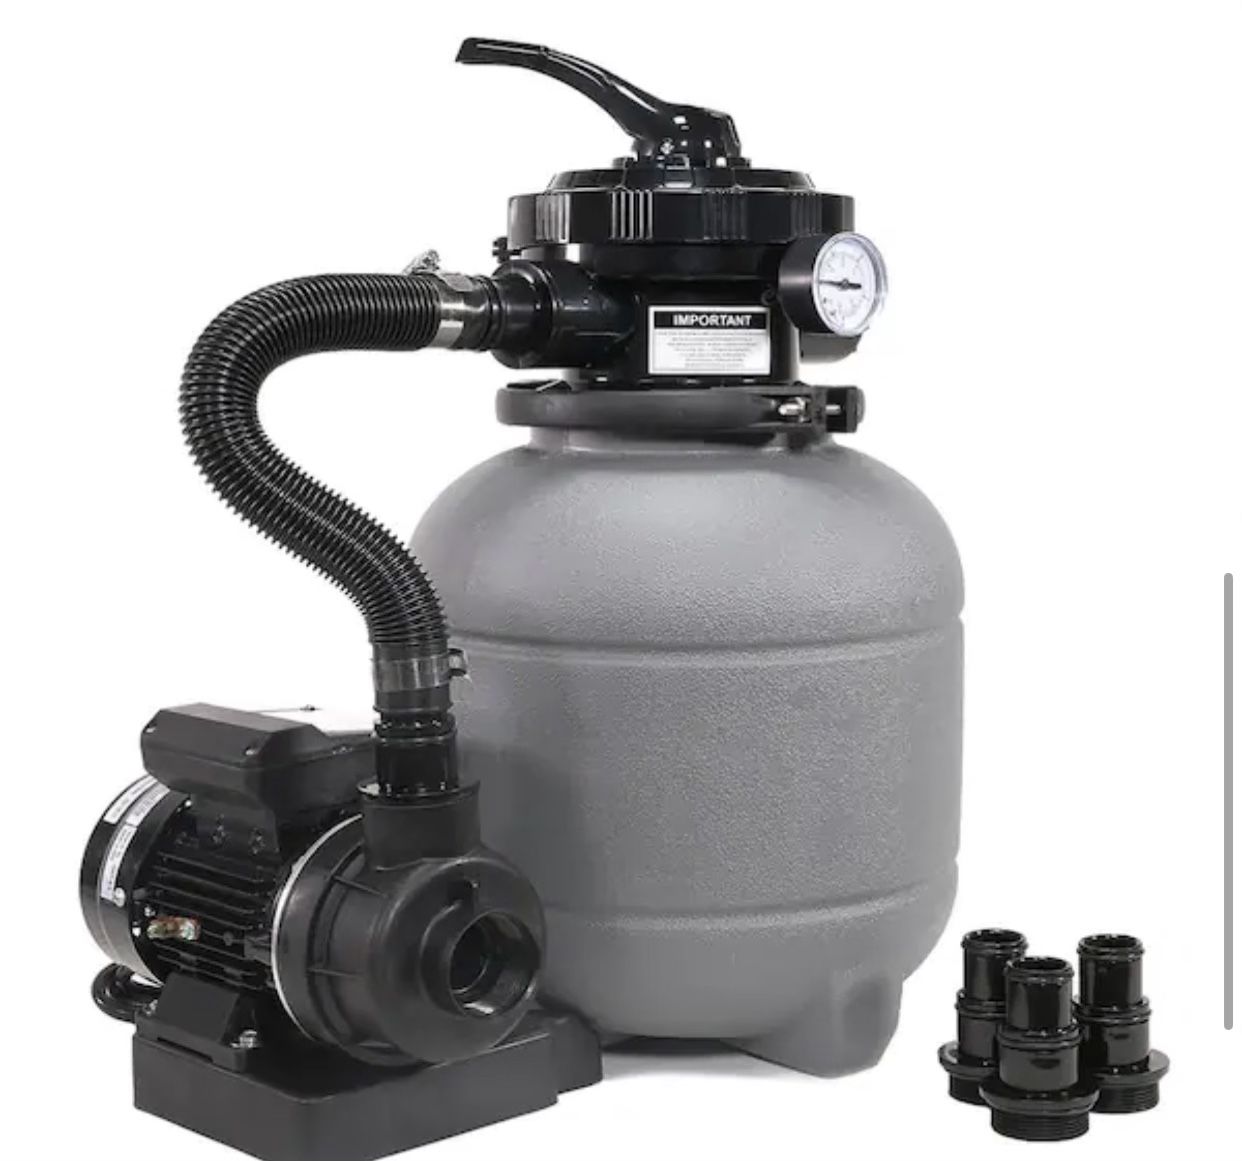 XtremepowerUS 12 in. Sand Filter Above-Ground with 0.25 HP Pump Power and Pool Pump 6-Way Valve Media Filter Included - 75030